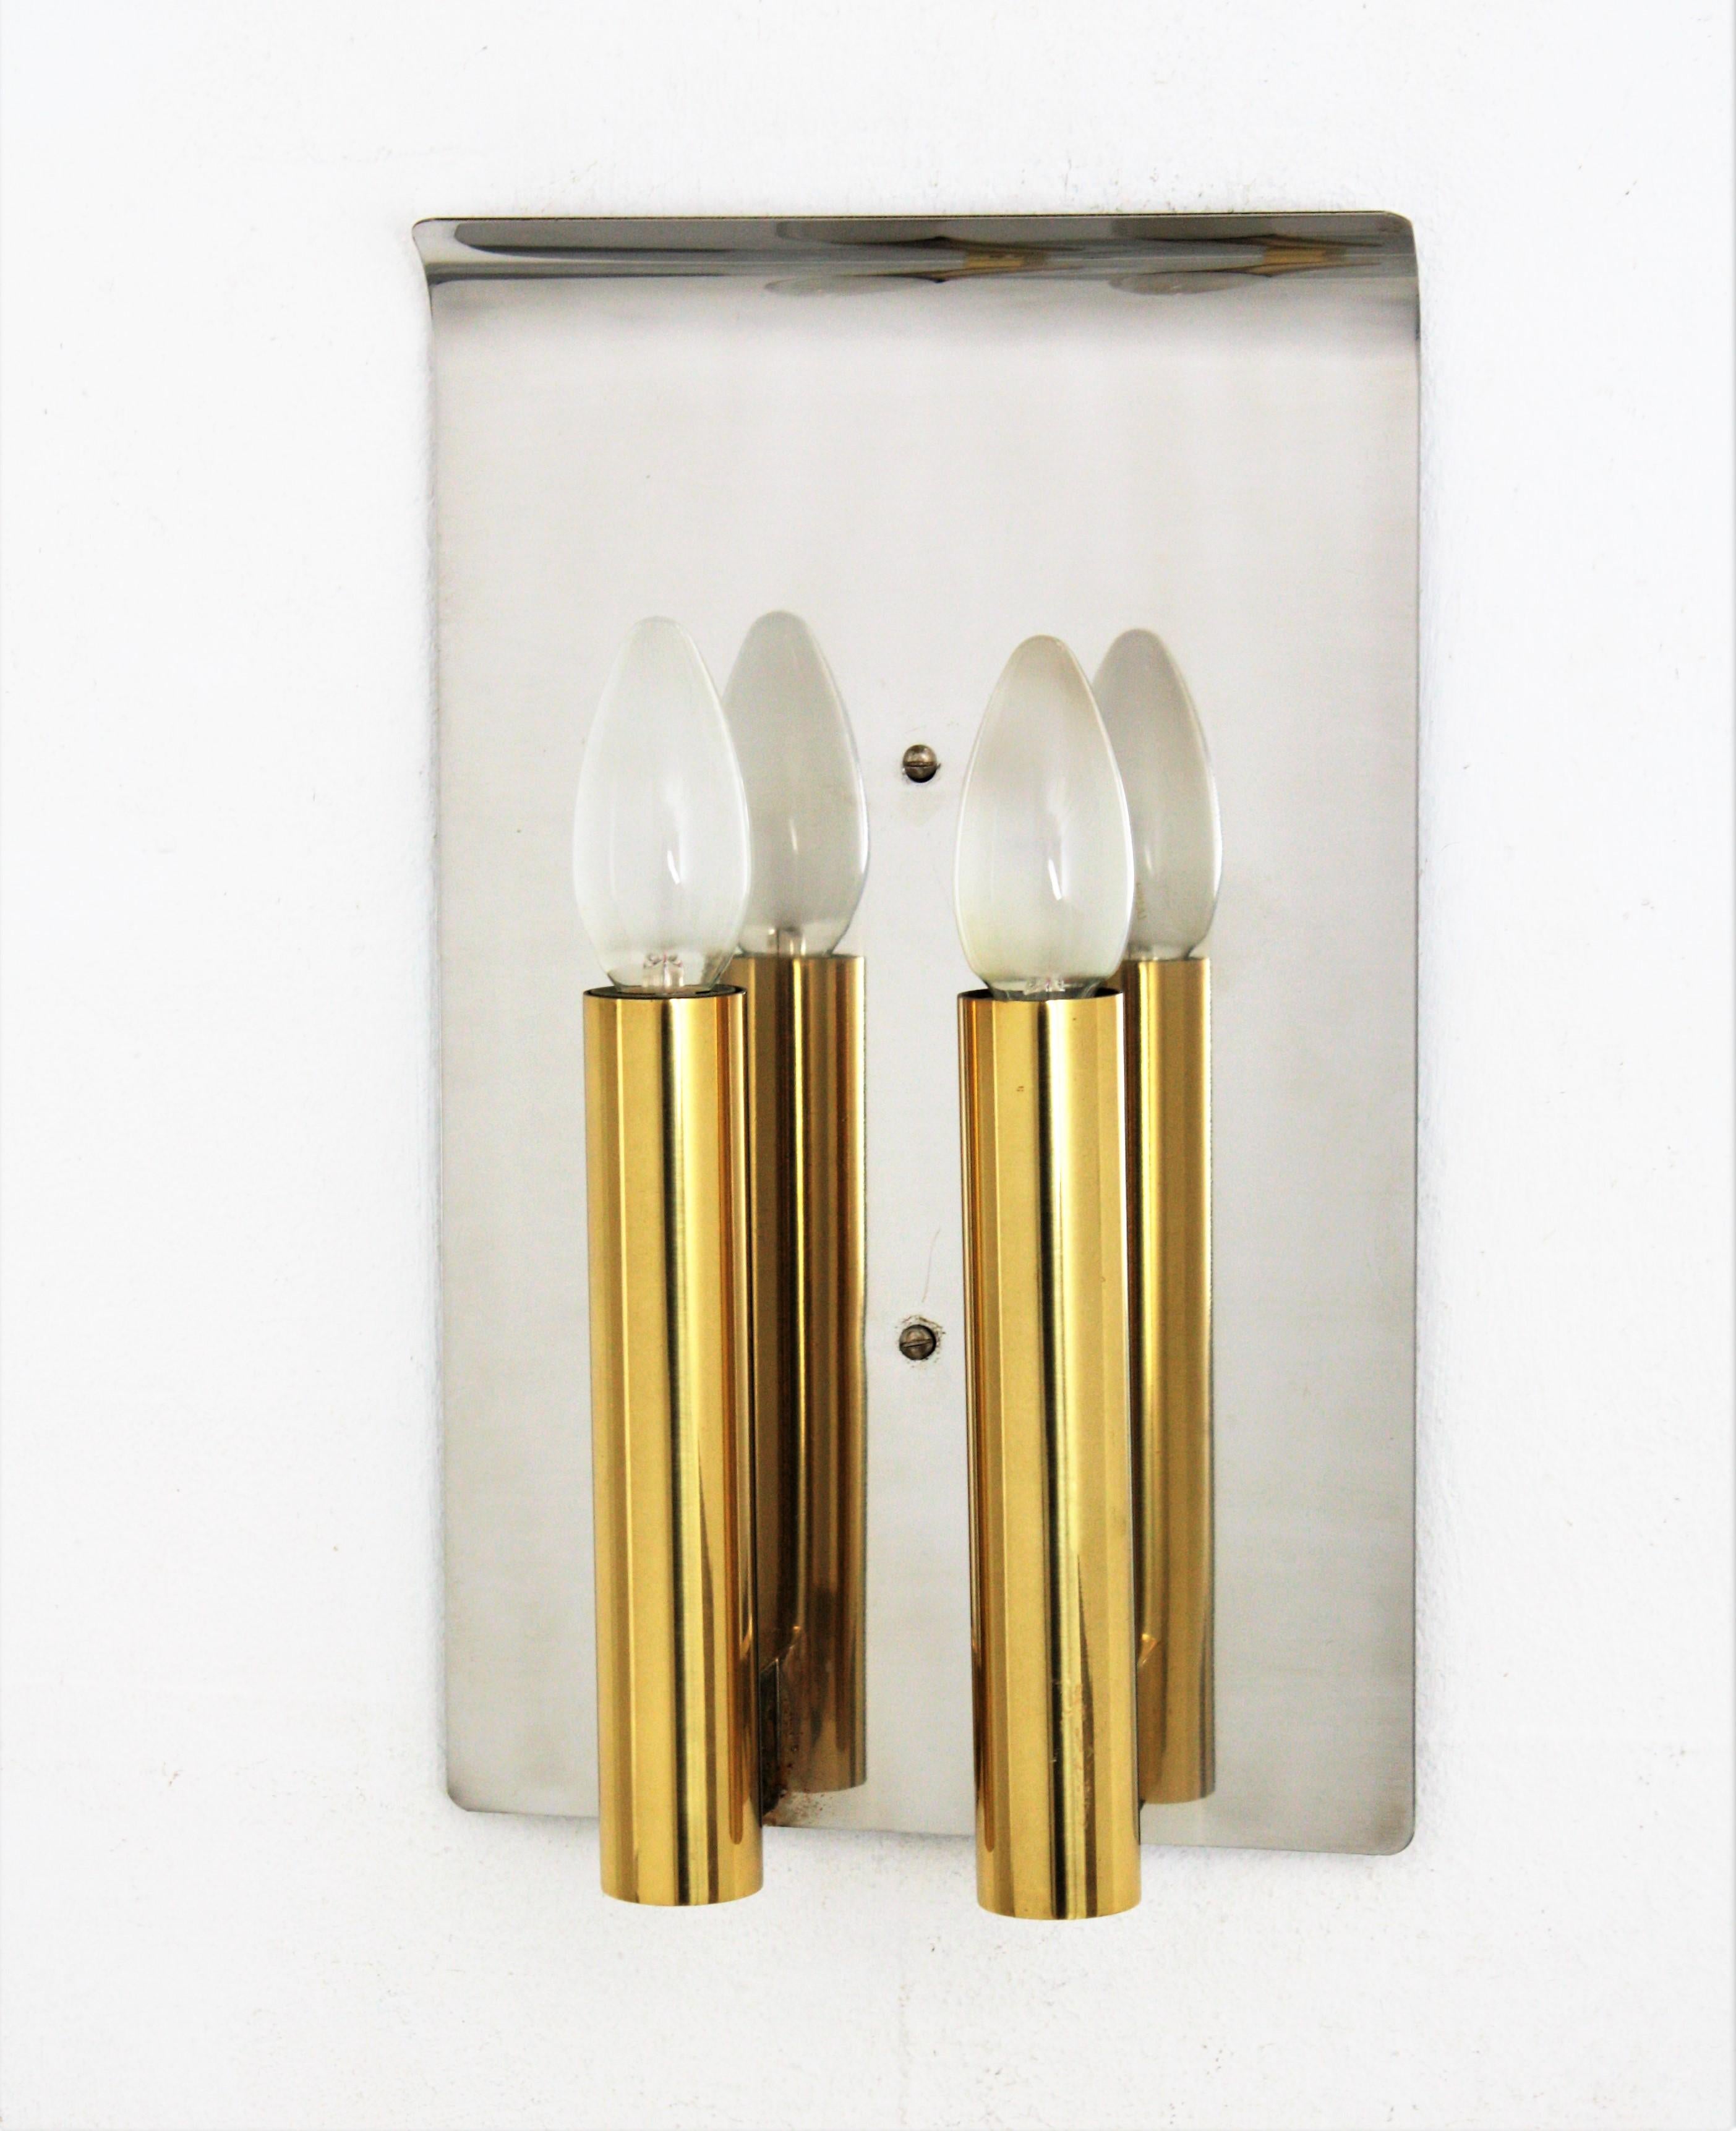 Elegant two-light modernist brass and steel wall sconce. Attributed to Gaetano Sciolari. Italy, 1960s
This wall light features a stainless steel back panel with curved ending top holding two polished brass cylinder shaped candelabra holders.
Very